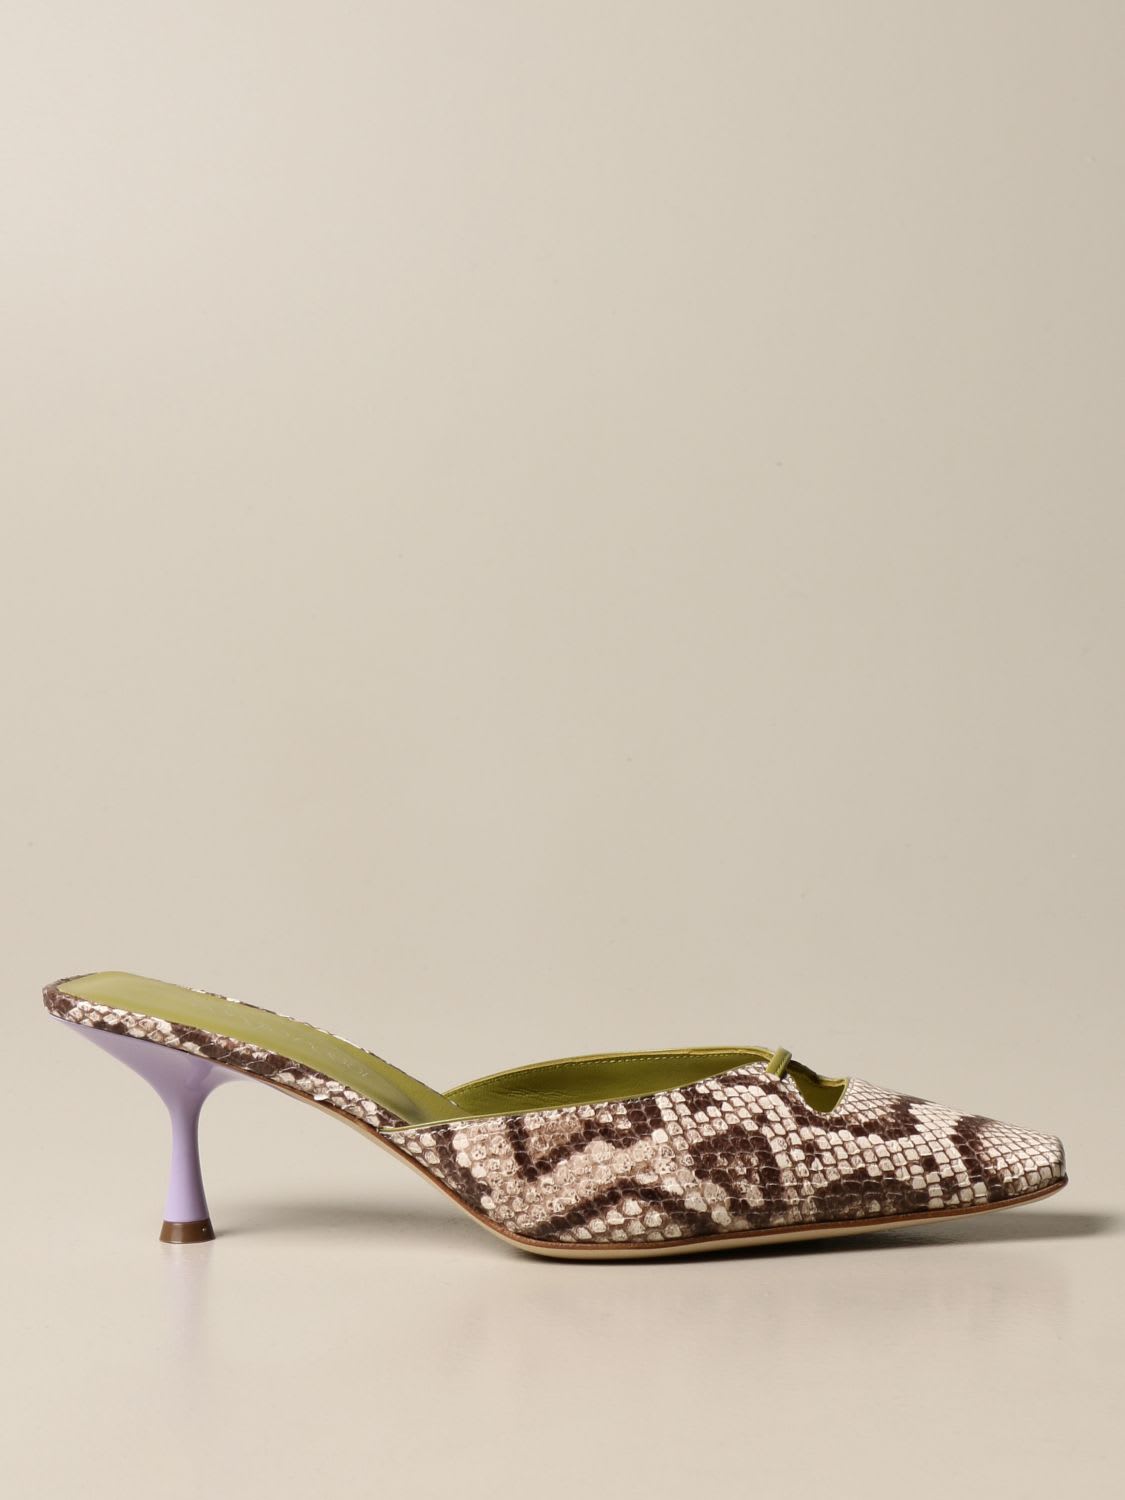 Buy Sergio Rossi Heeled Sandals Sergio Rossi Mules In Leather With Python Print online, shop Sergio Rossi shoes with free shipping